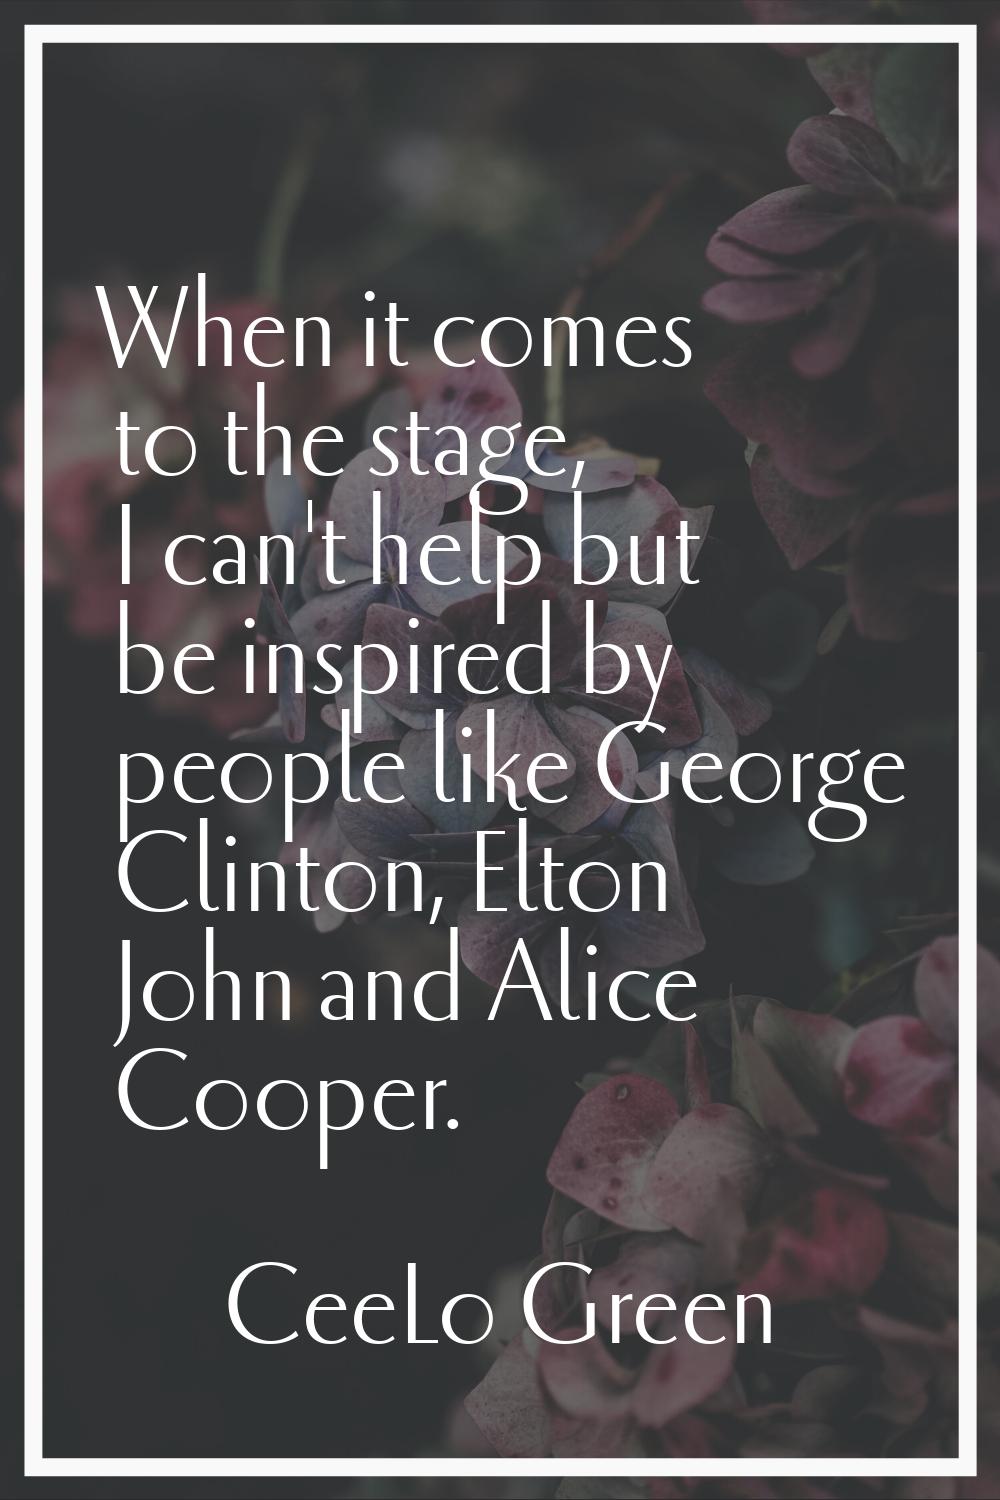 When it comes to the stage, I can't help but be inspired by people like George Clinton, Elton John 